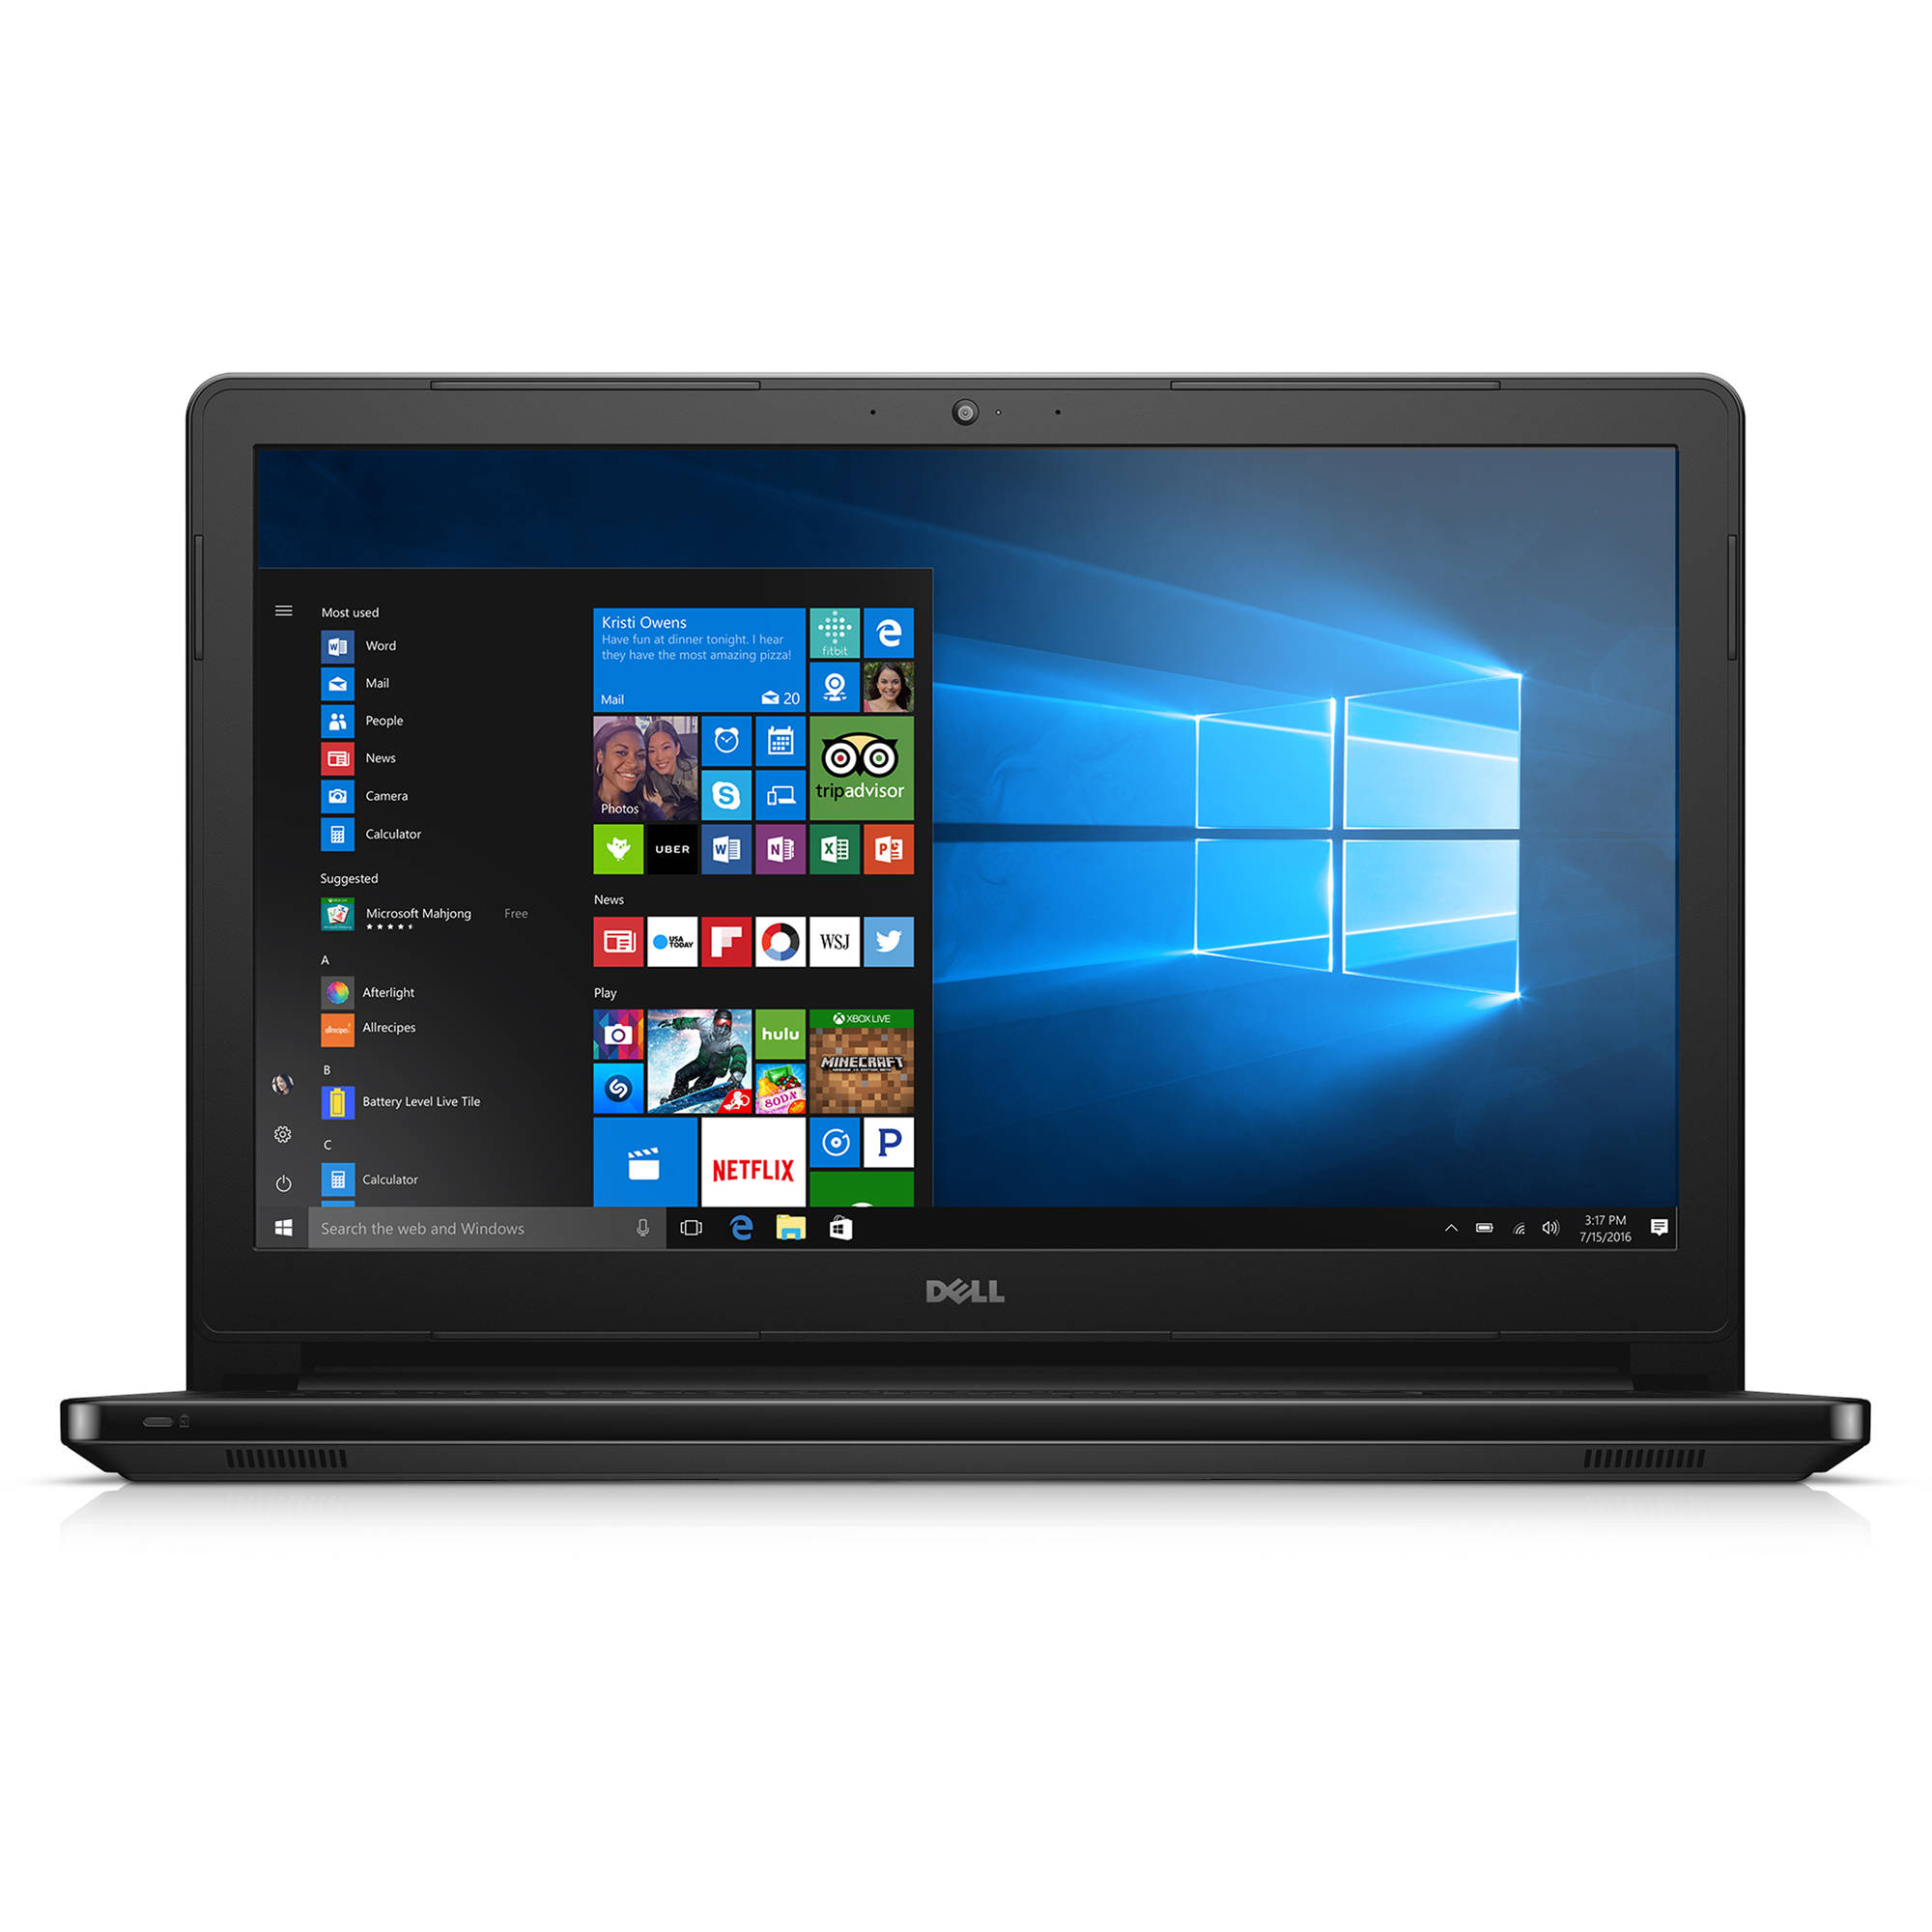 Dell Inspiron 15 5566 Notebook